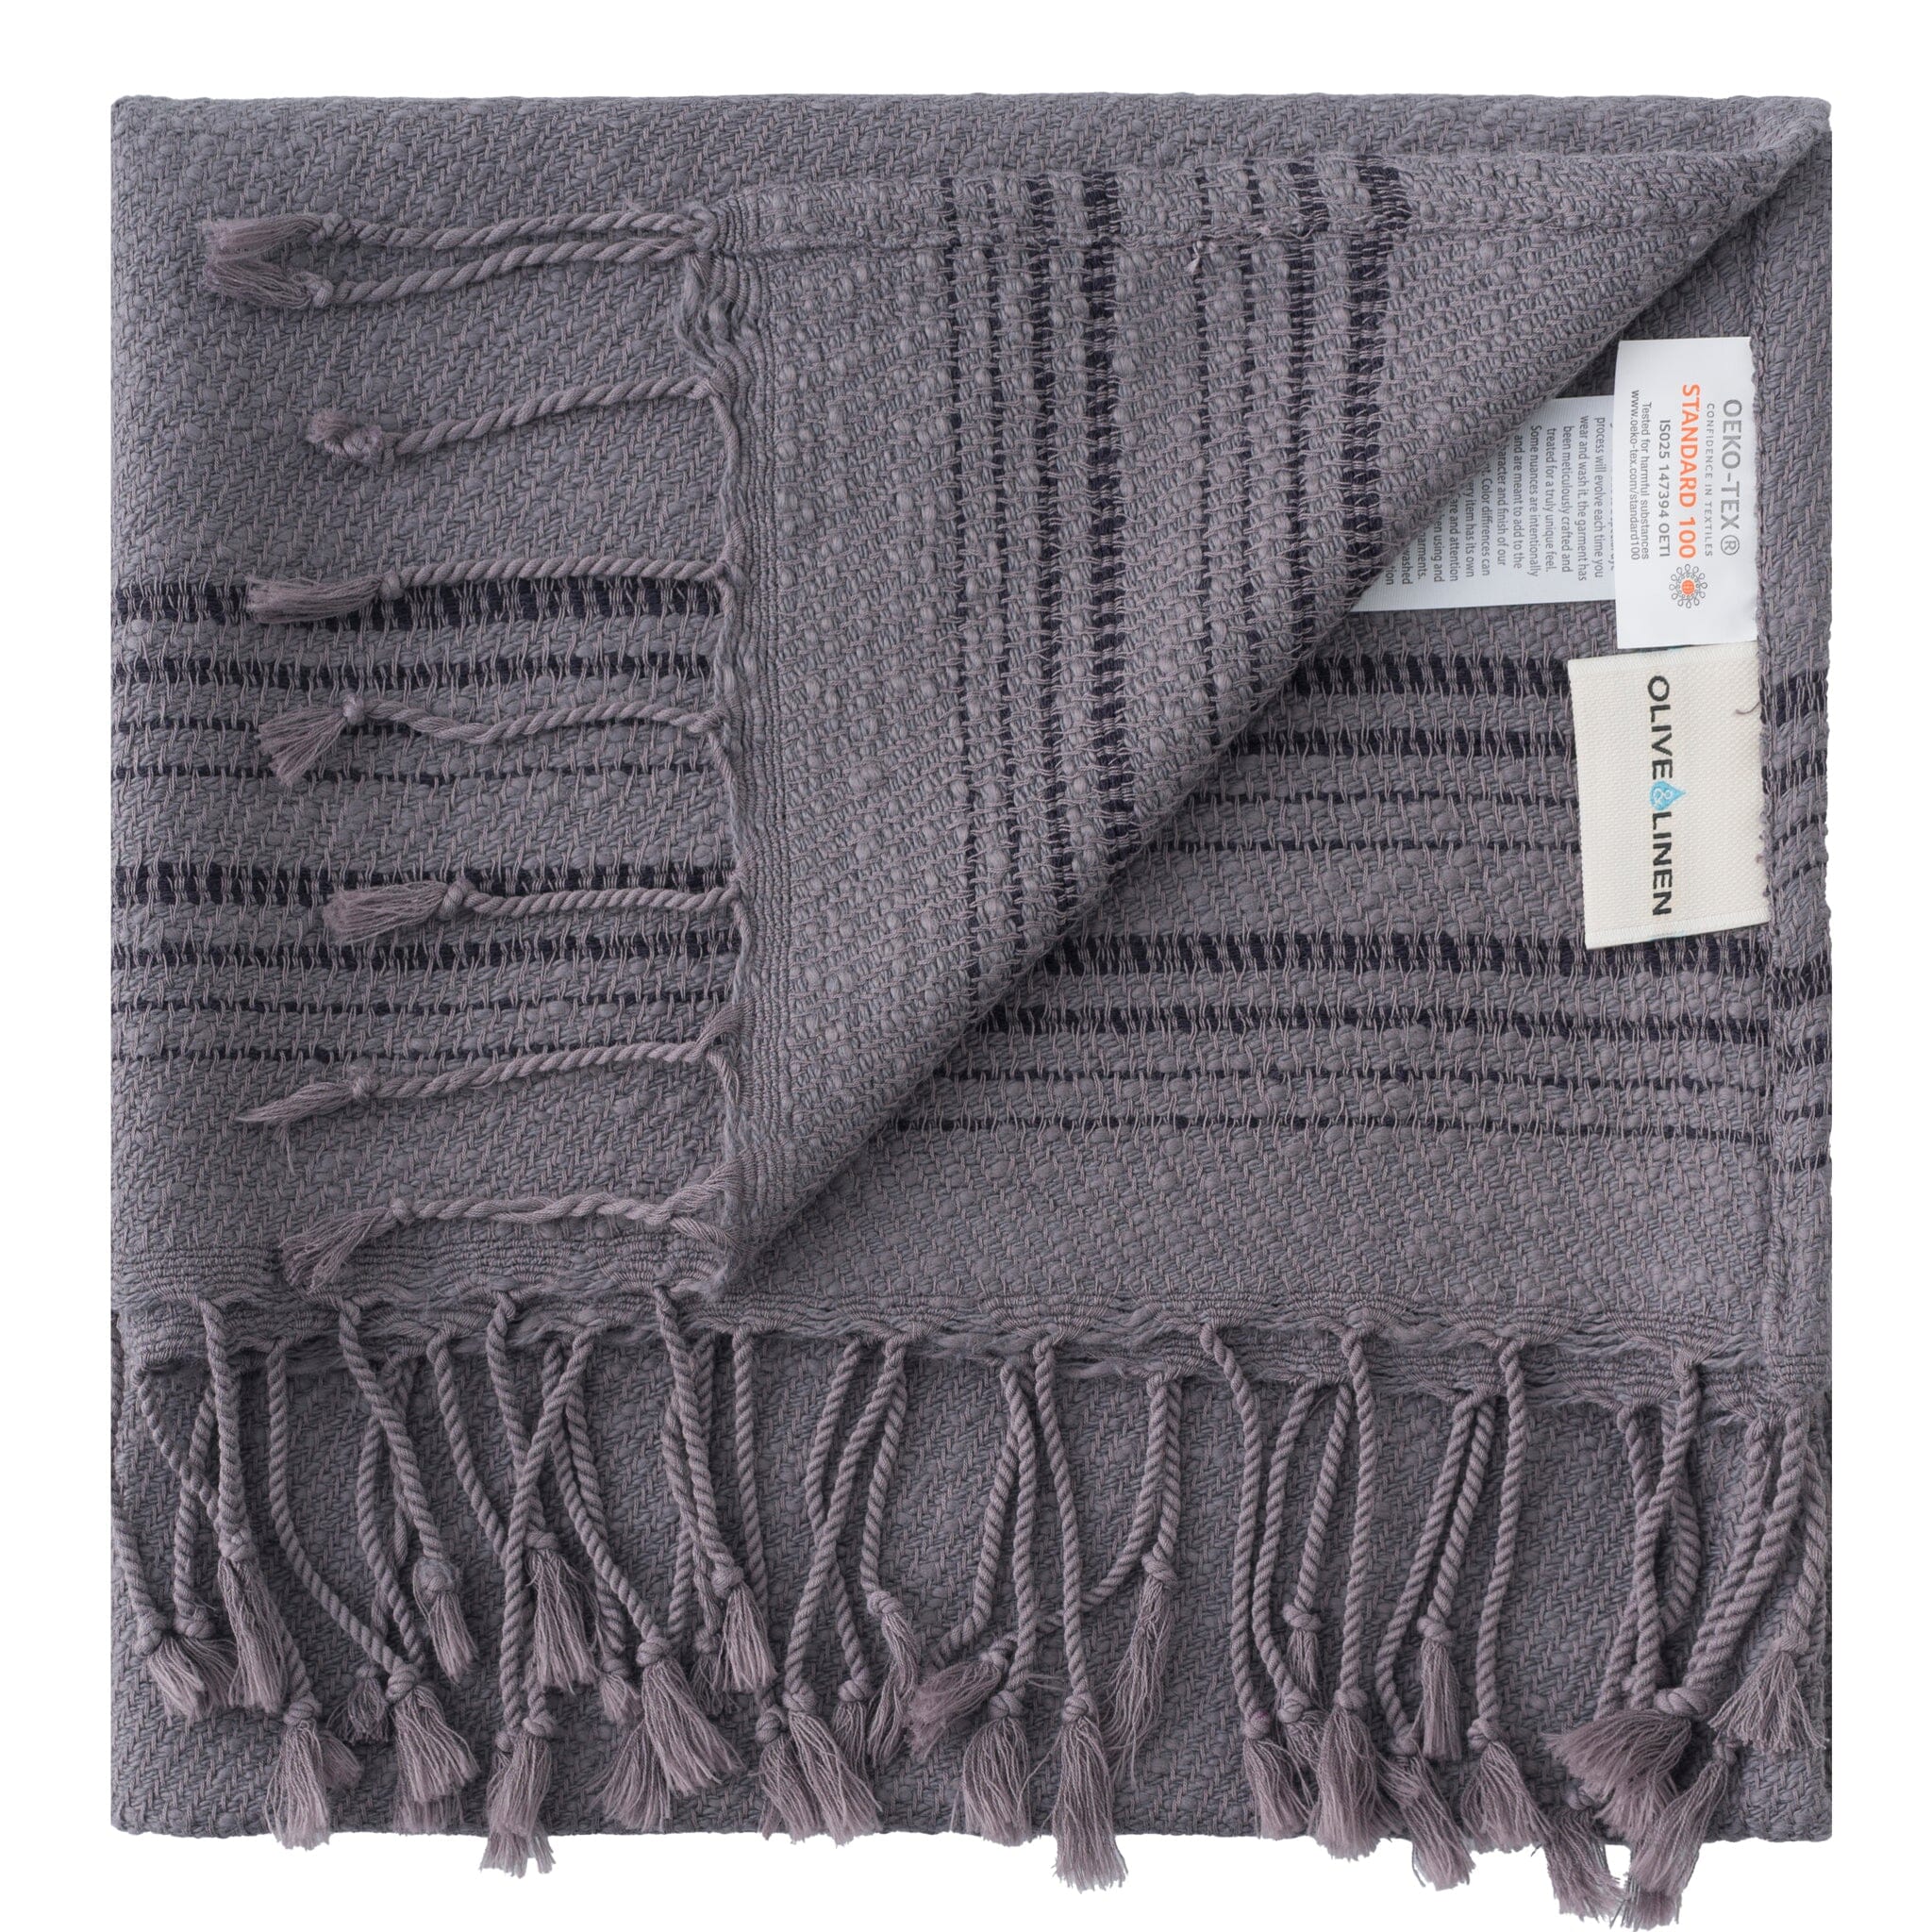 Olive and Linen Terra Hand or Kitchen Towel - Black